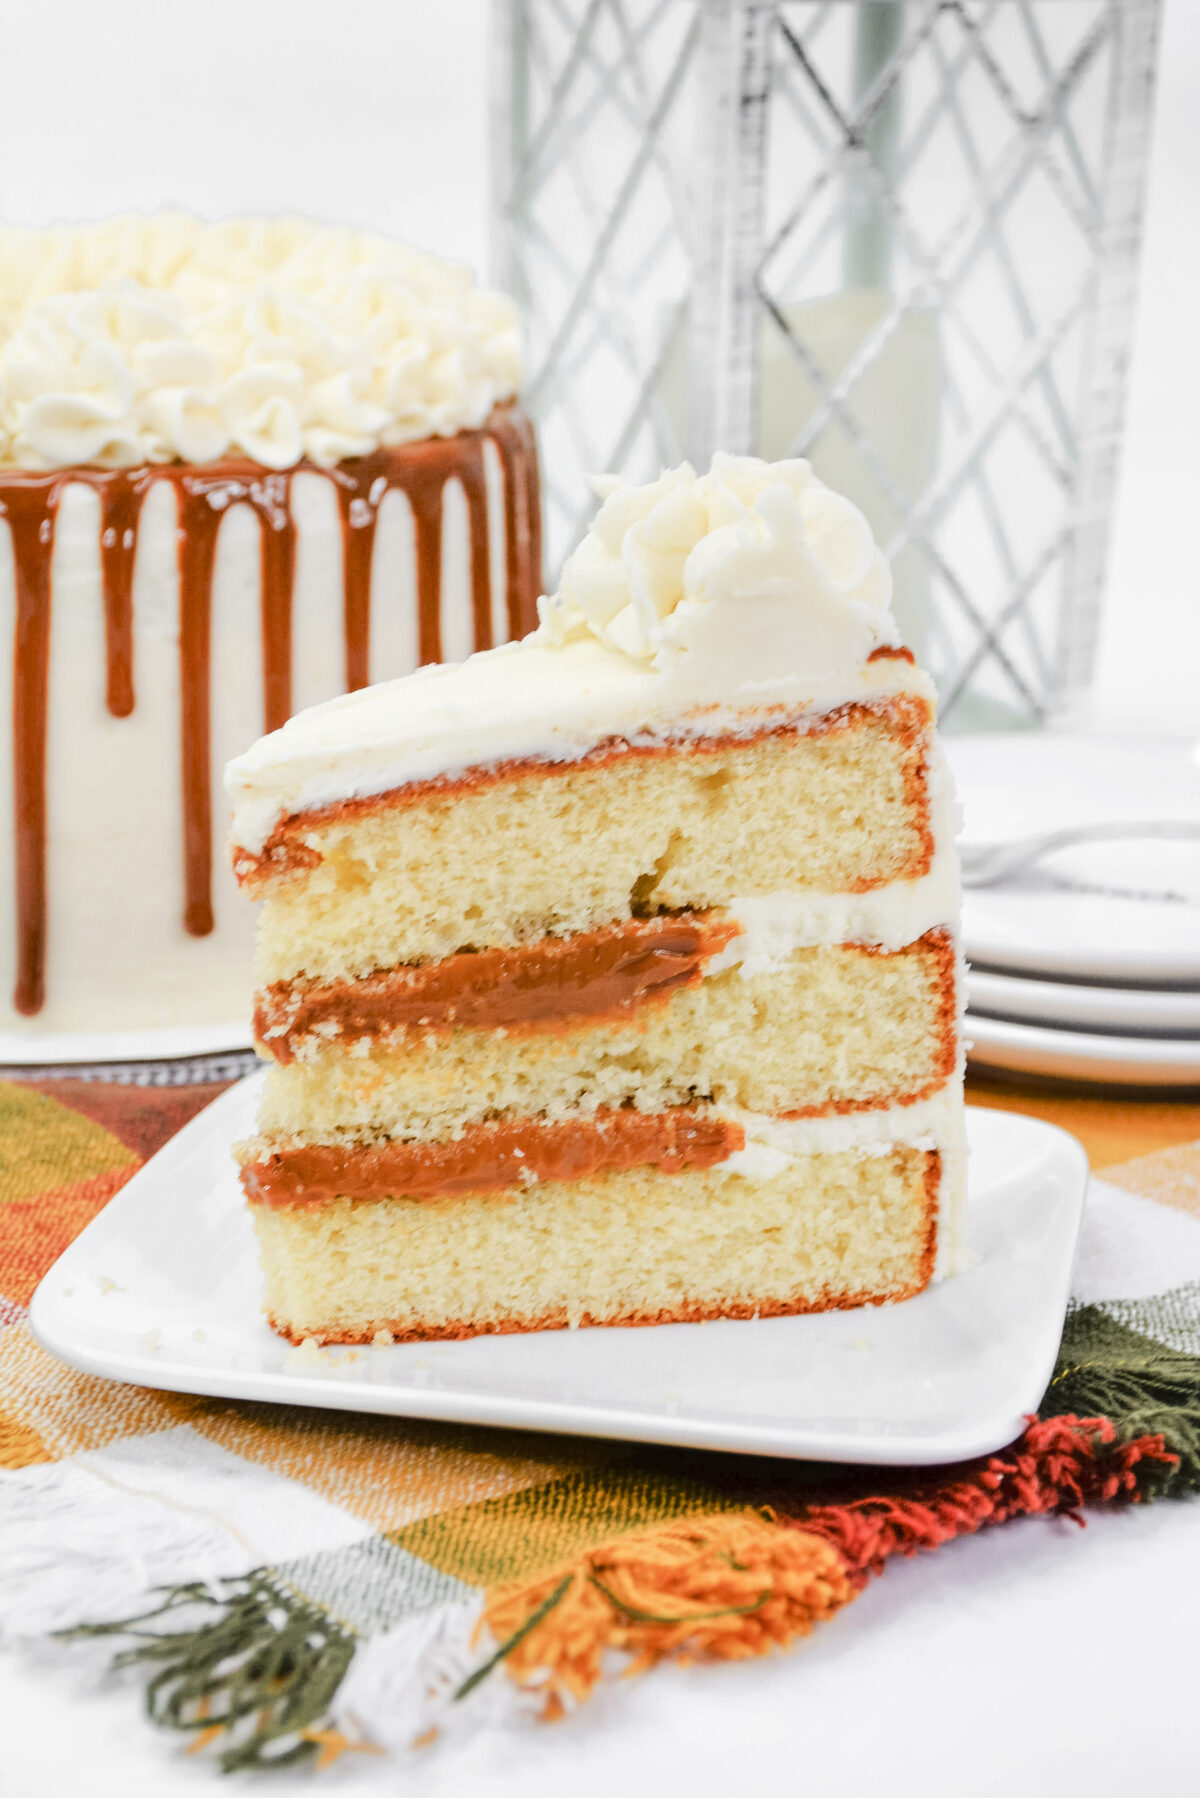 Indulge in the ultimate Dulce De Leche Cake with our irresistible recipe. Layer upon layer of rich, creamy caramel goodness awaits you.